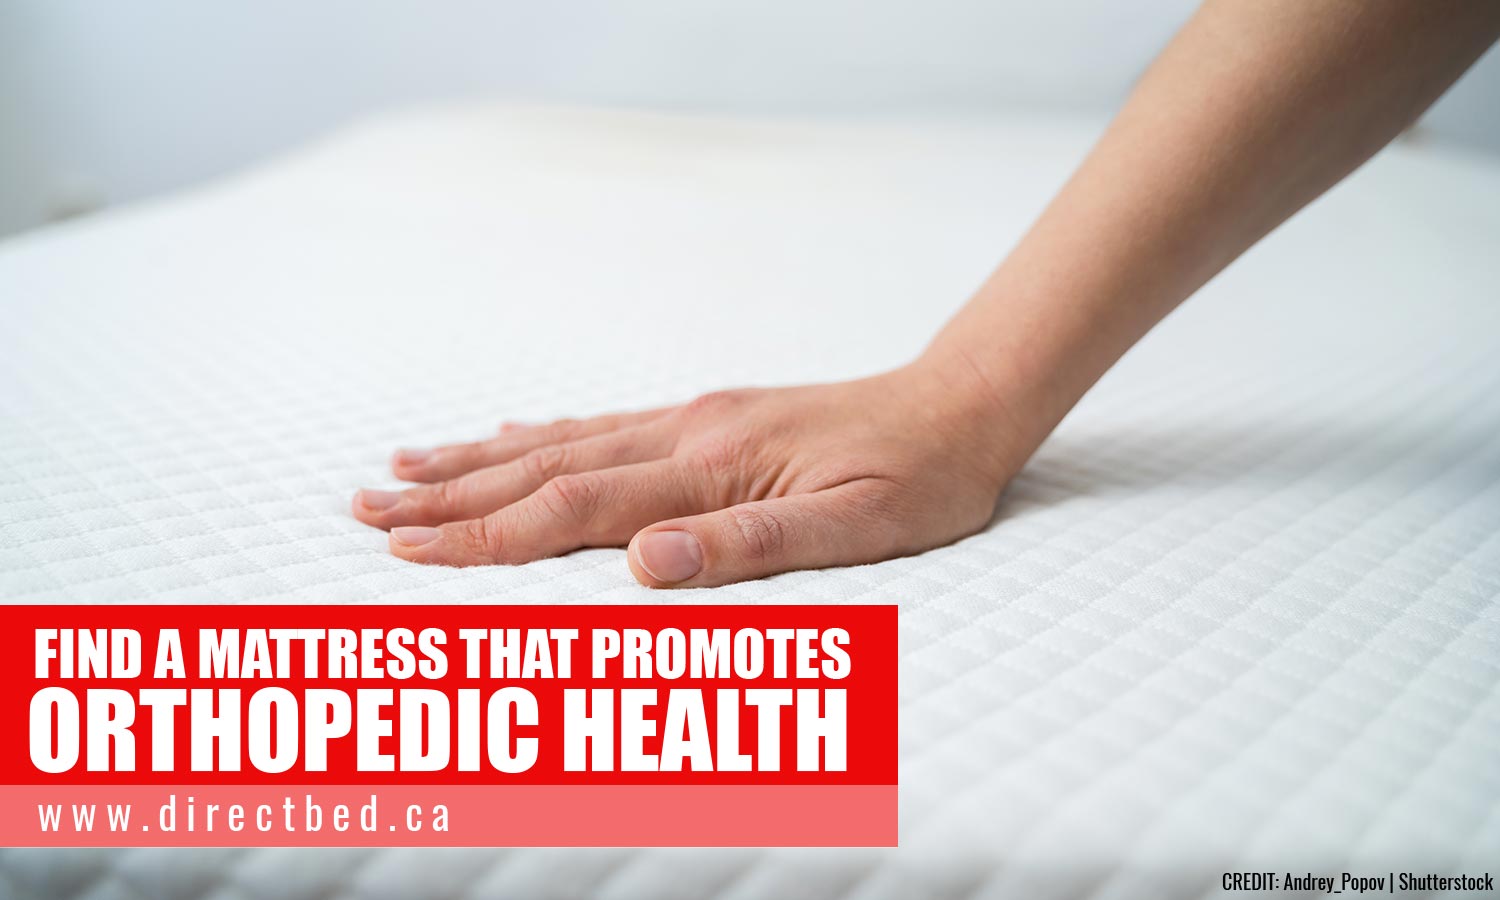 Find a mattress that promotes orthopedic health